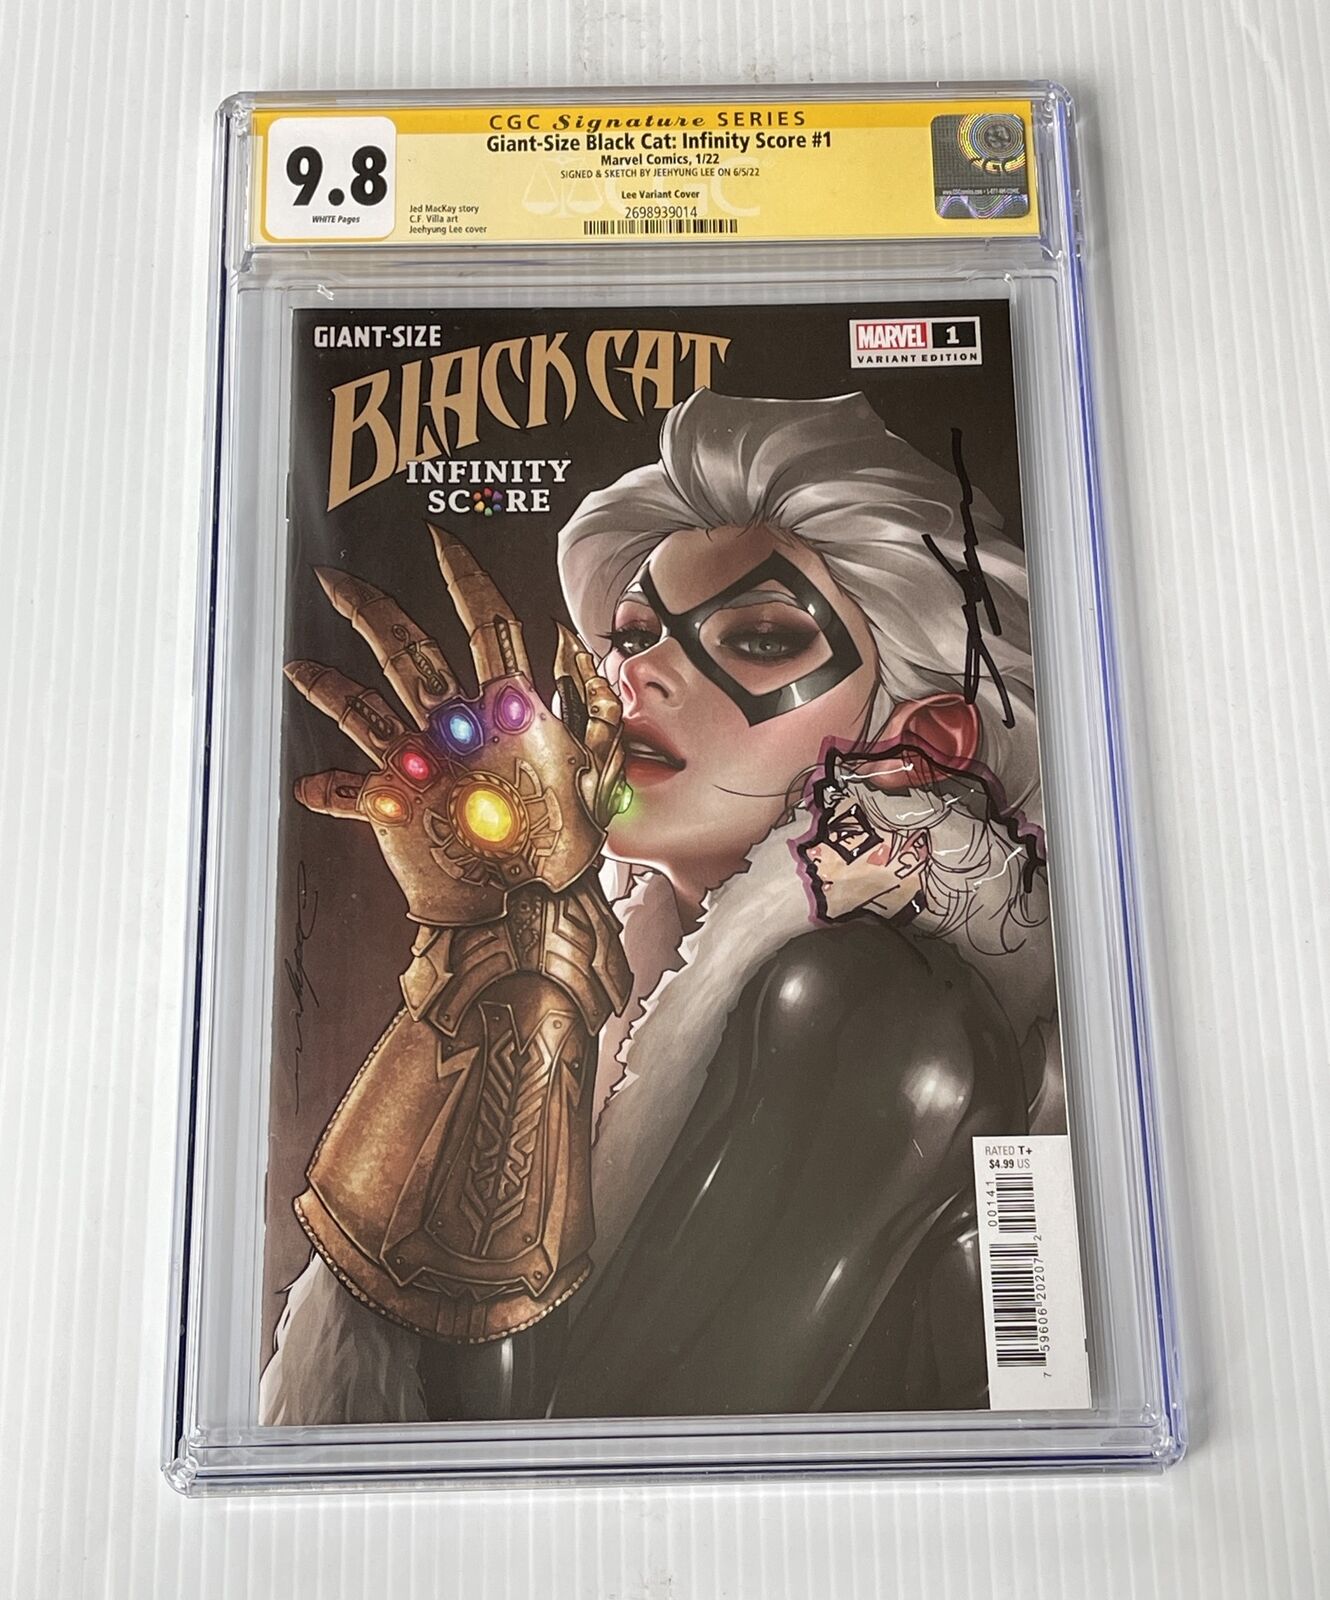 Jeehyung Lee Signed Sketch Black Cat Infinity Trade Marvel Comics CGC 9.8 6